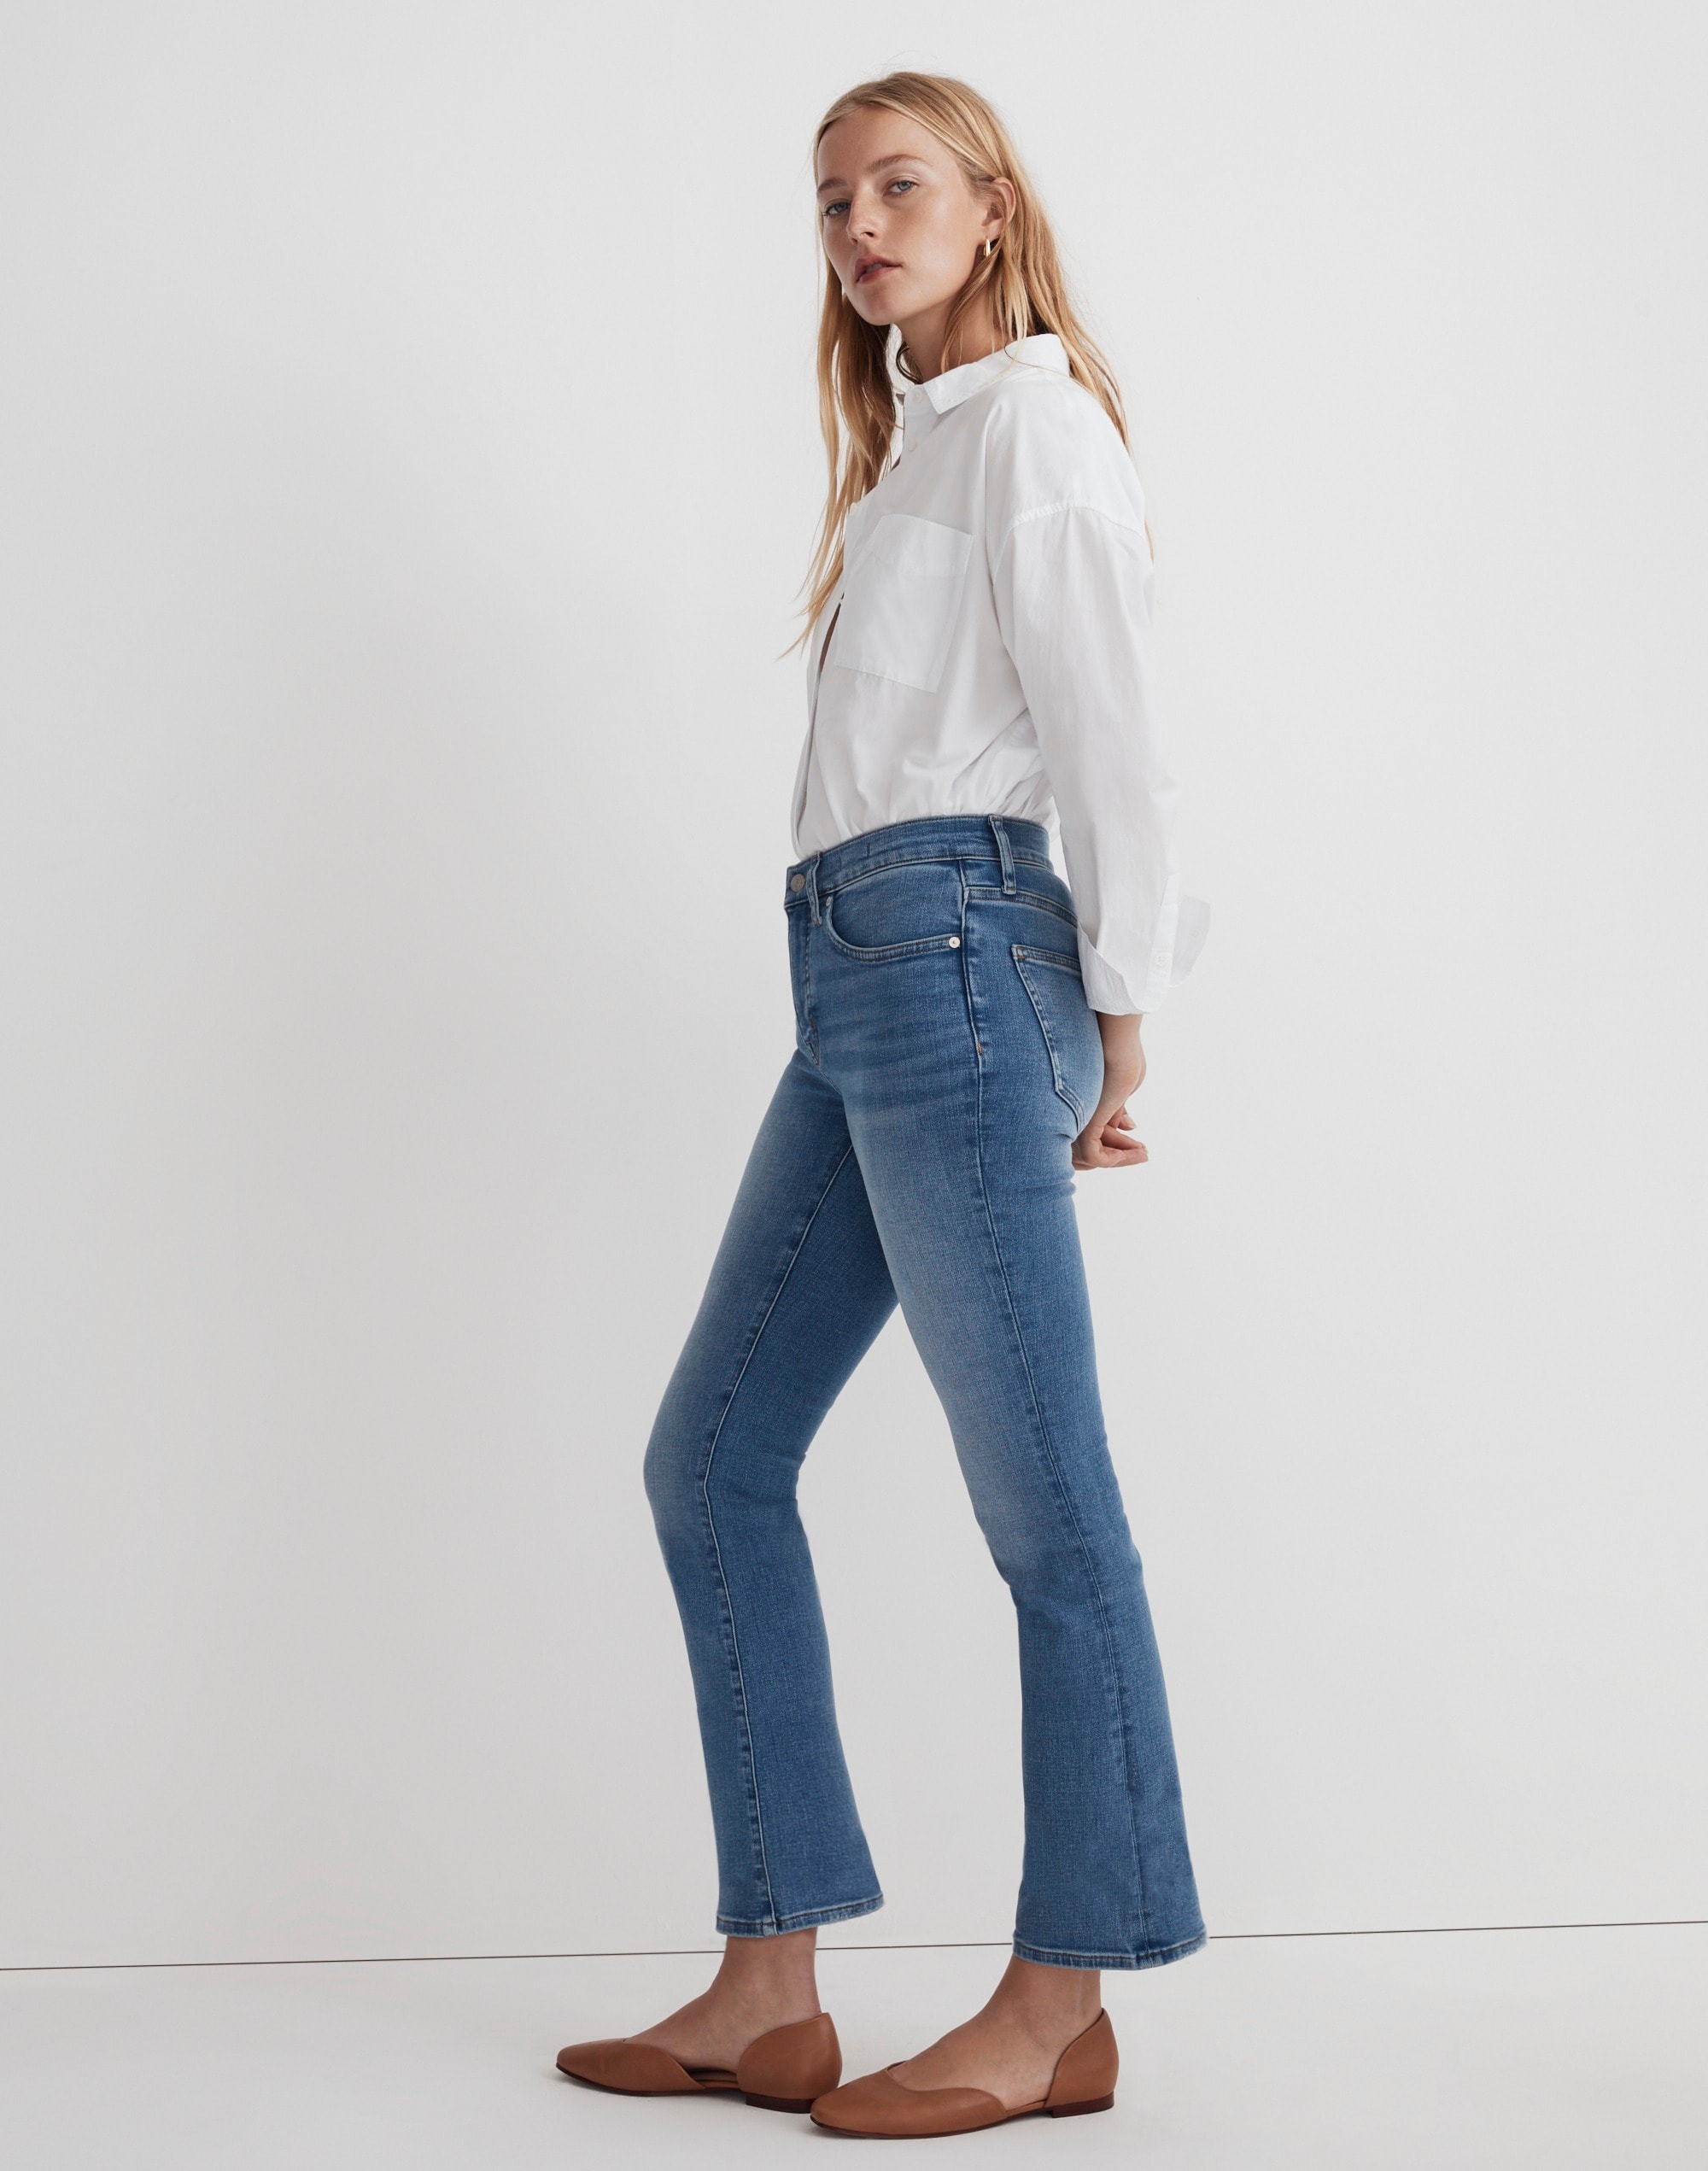 Kick Out Crop Jeans in Mather Wash